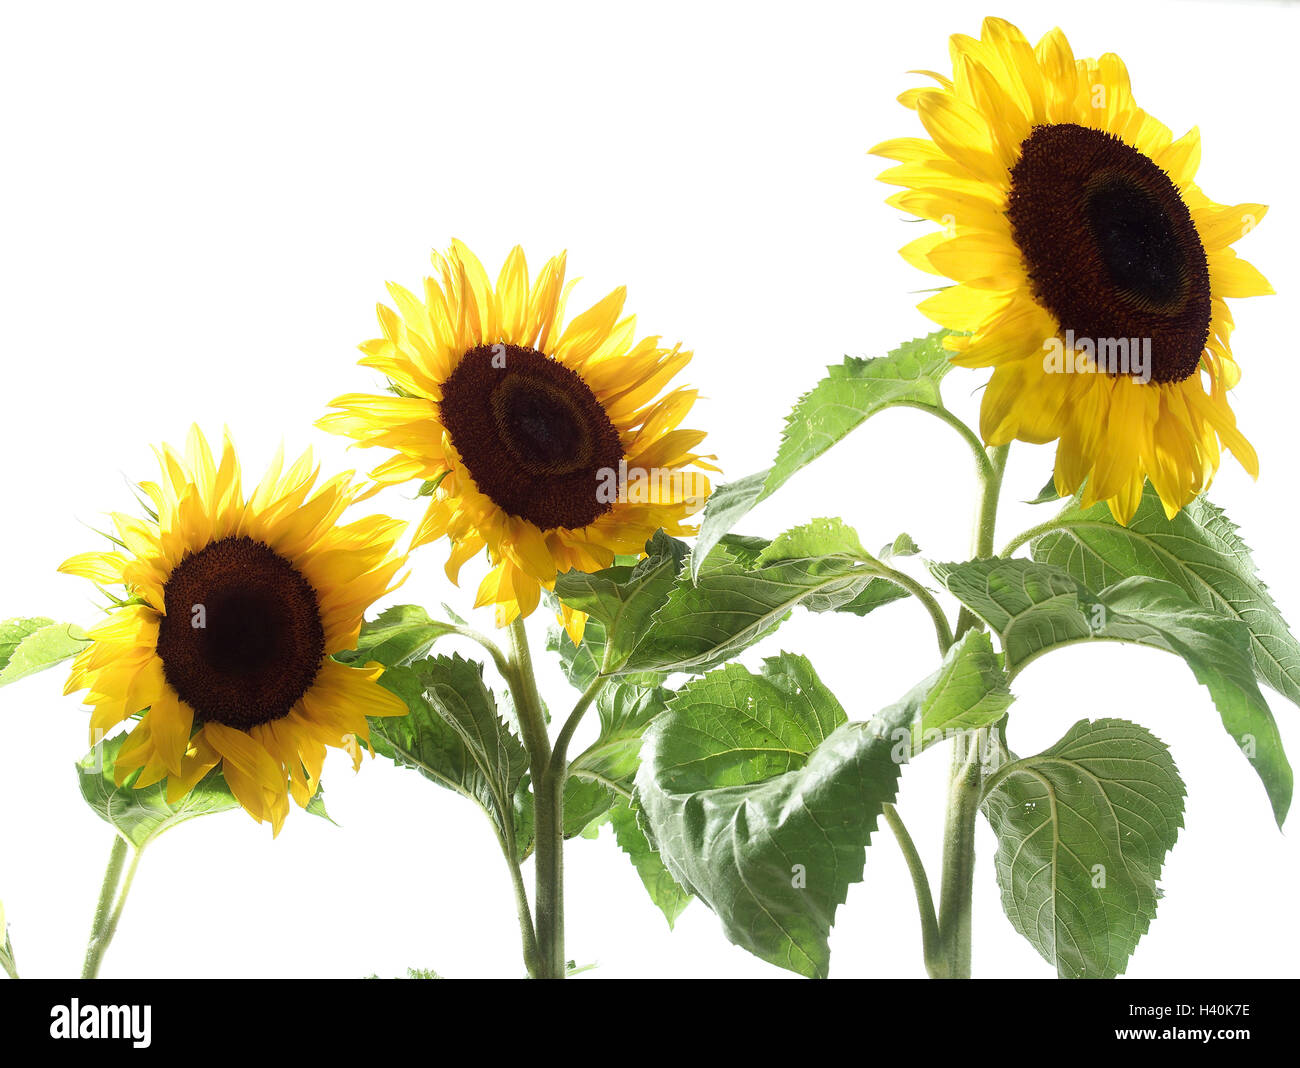 Sunflowers, detail, plants, plant world, vegetation, botany, nature, useful plants, flowers, three, Helianthus annuus, composites, blossom, blossoms, flower heads, cut outs Stock Photo